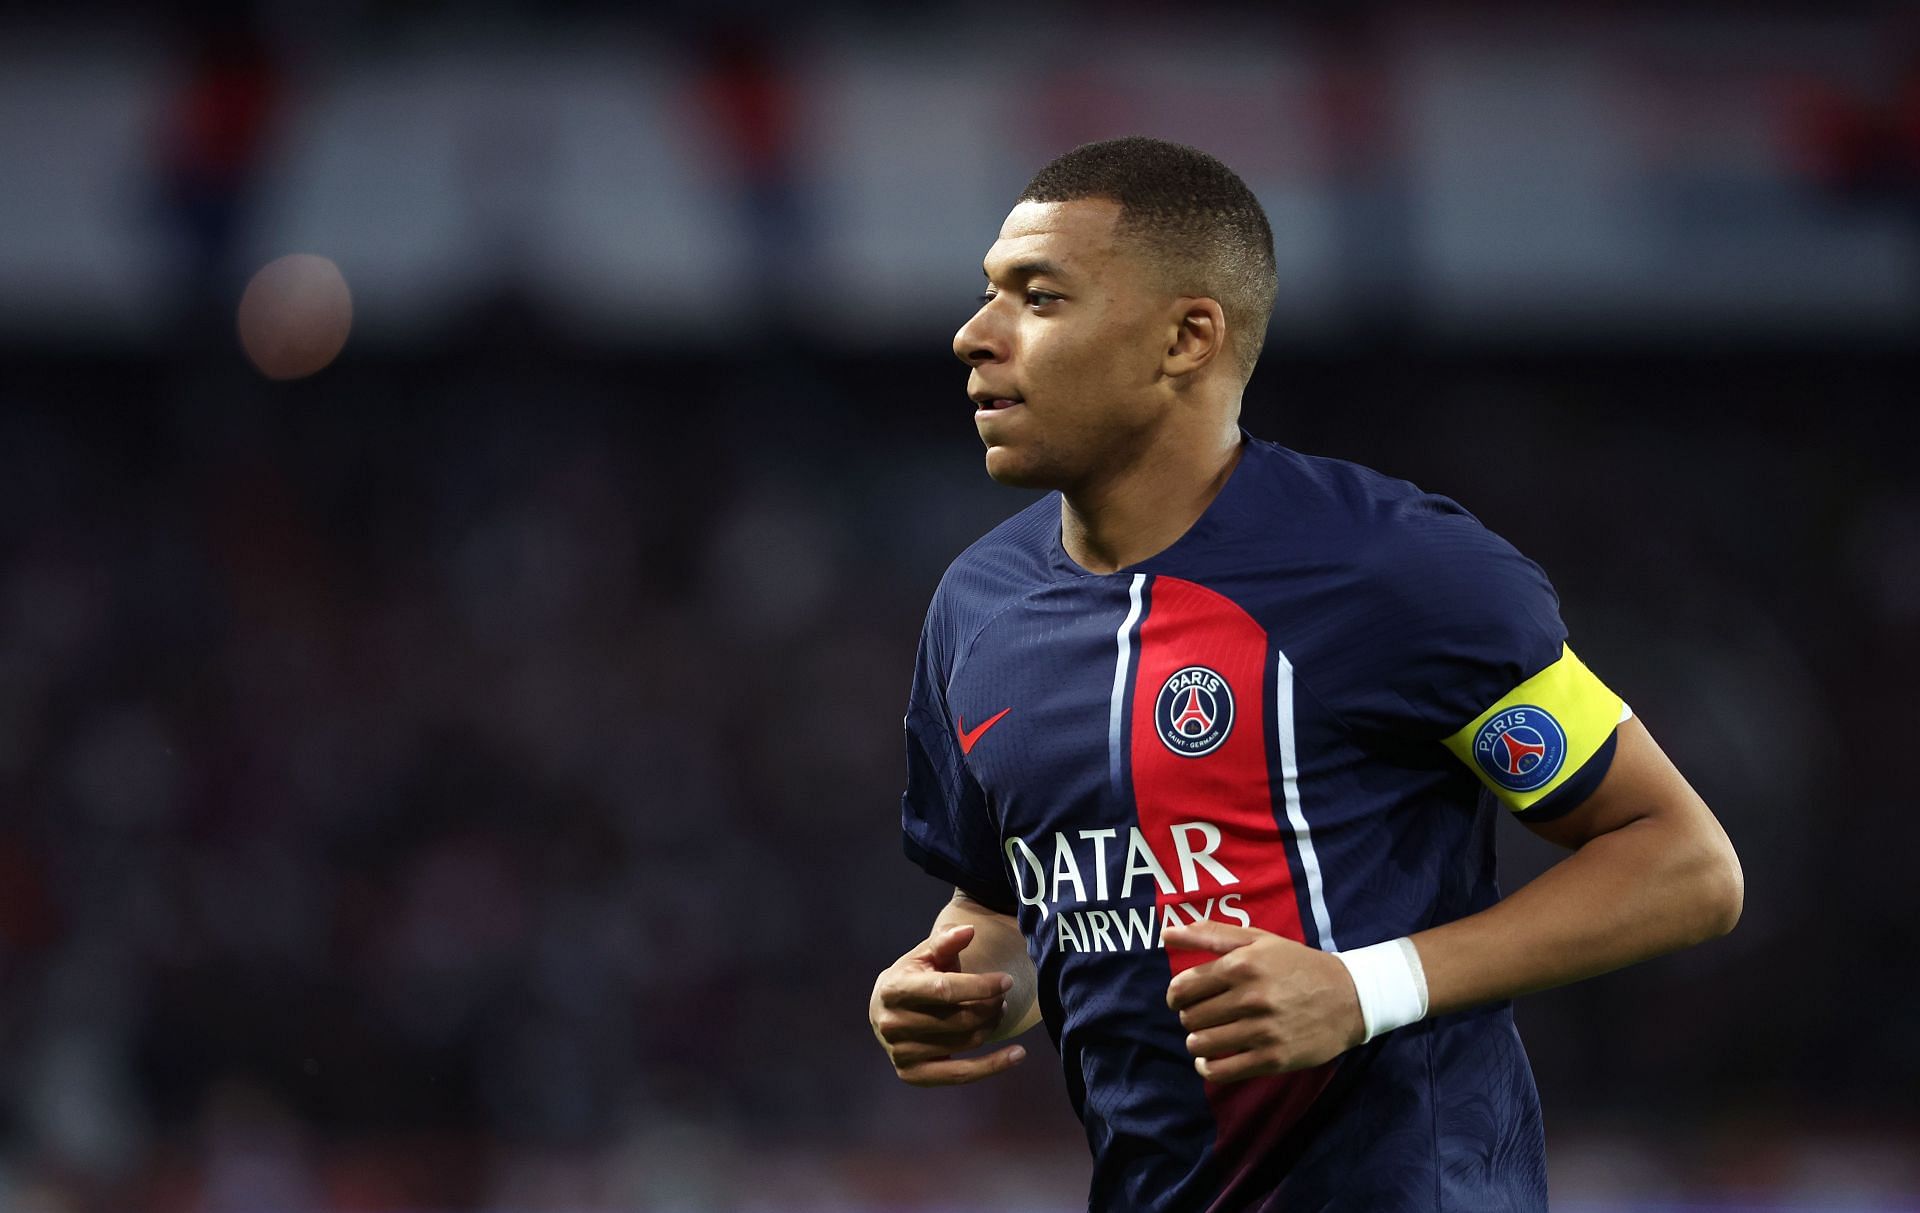 Mbappe has received a massive offer to join the Saudi Pro League.